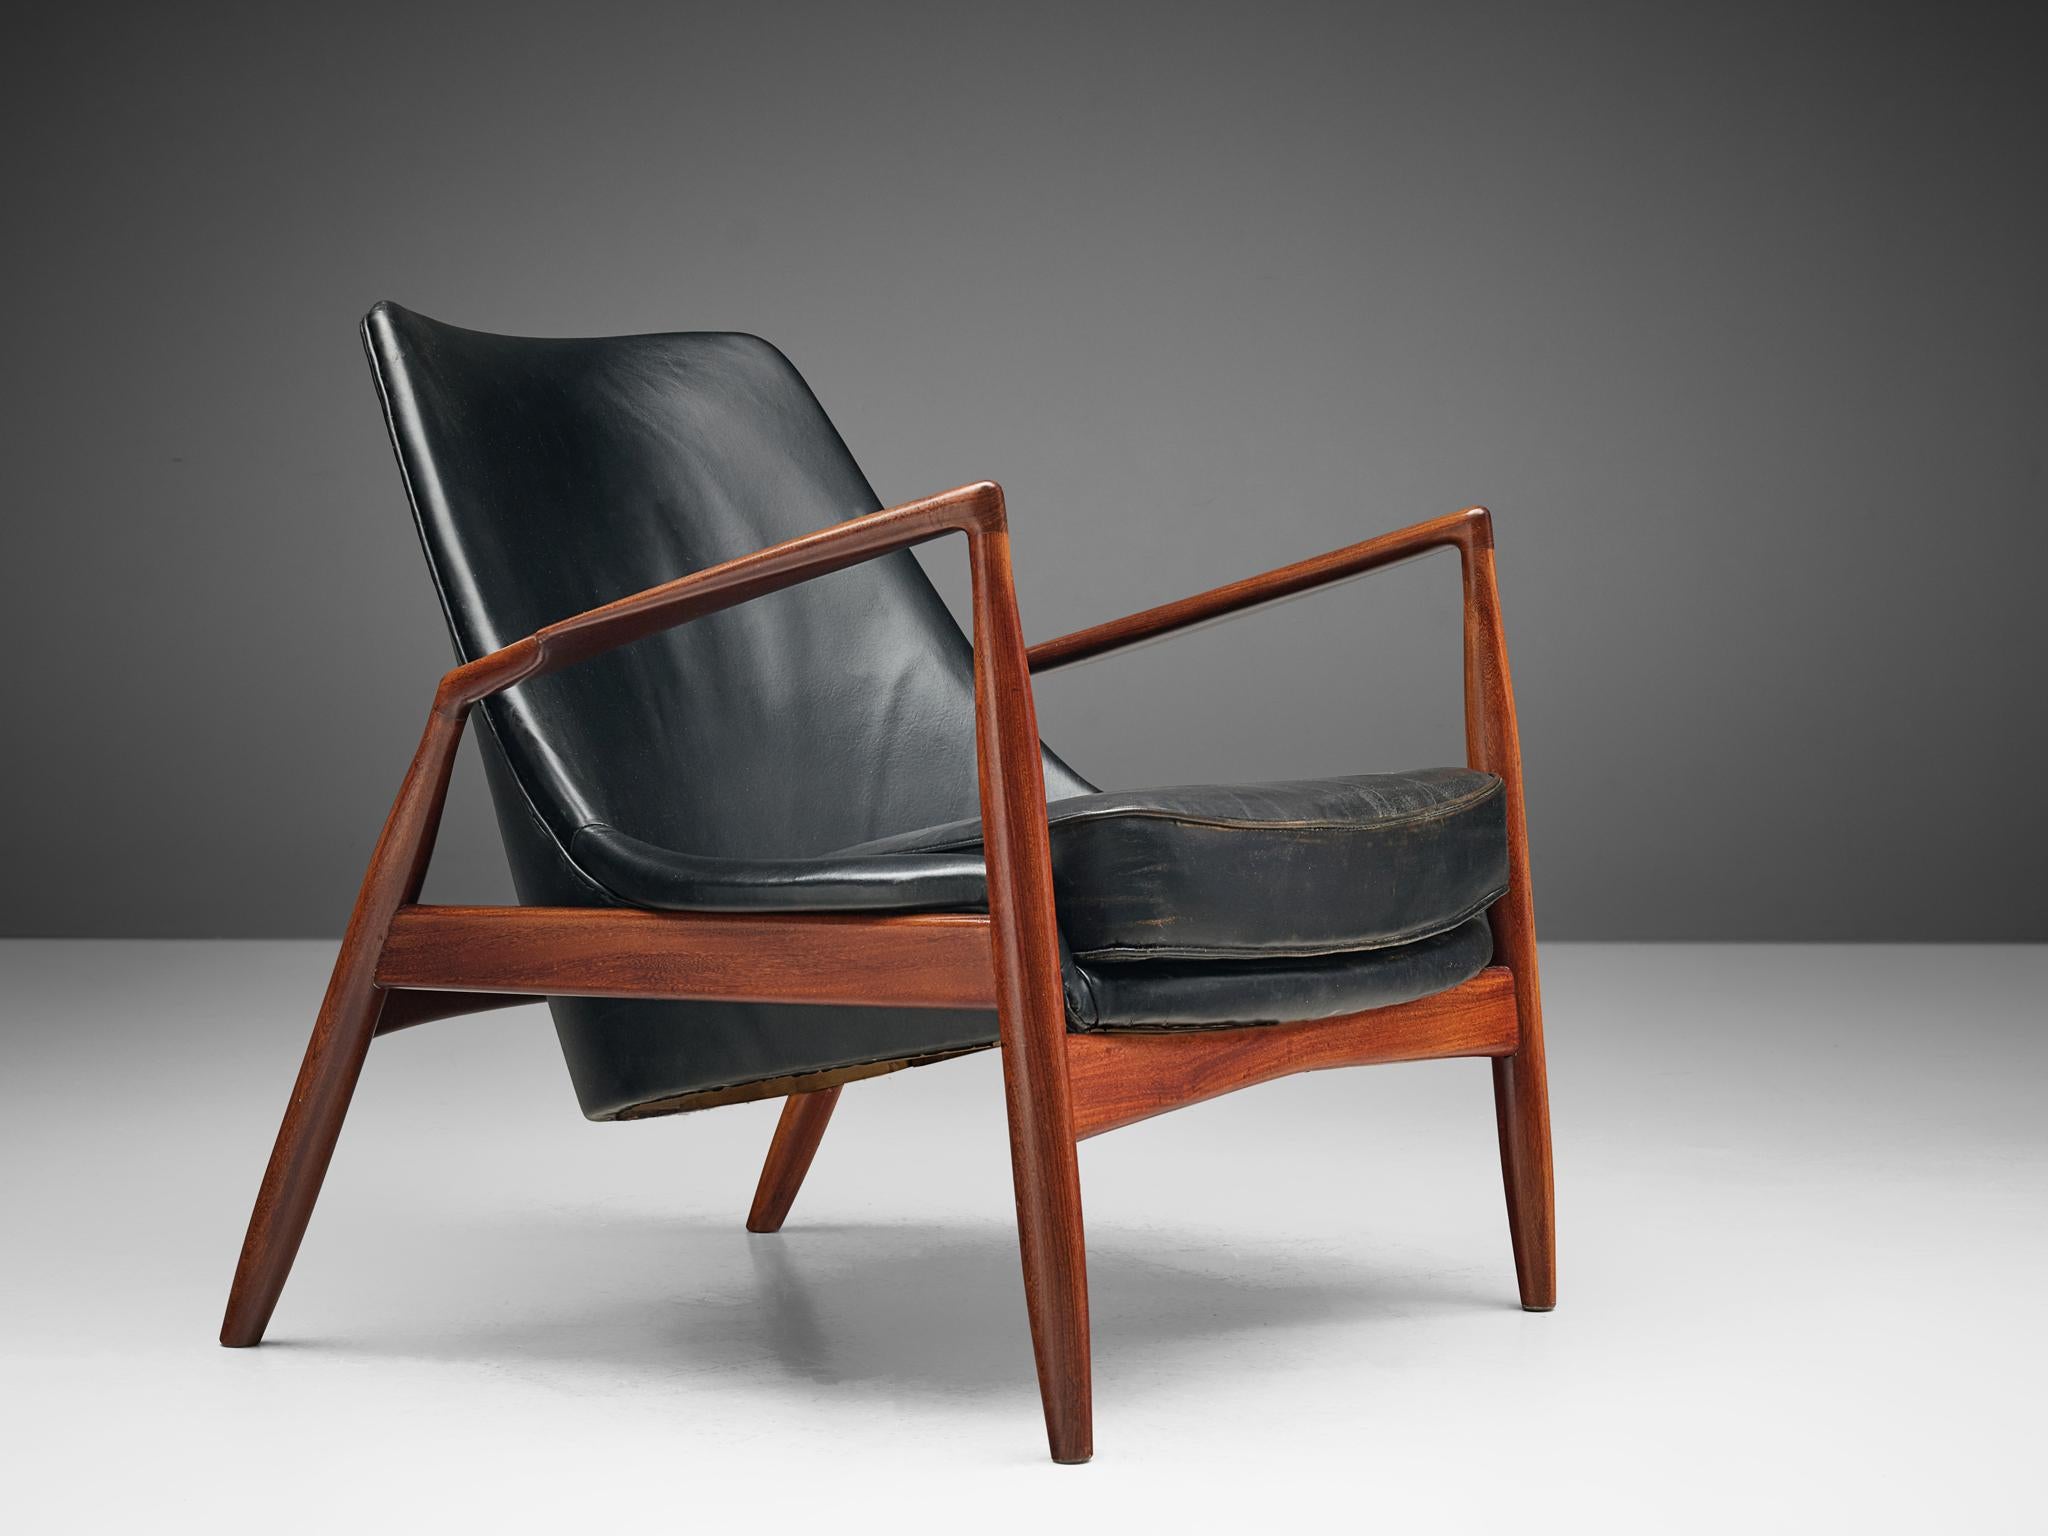 Ib Kofod-Larsen for OPE, restored 'Sälen' (Seal) lounge chair model 503-799, teak and leather, Sweden, 1956. 

Iconic seal lounge chair by Ib Kofod-Larsen, fully restored and reupholstered by the experienced craftsmen in our in-house atelier. The